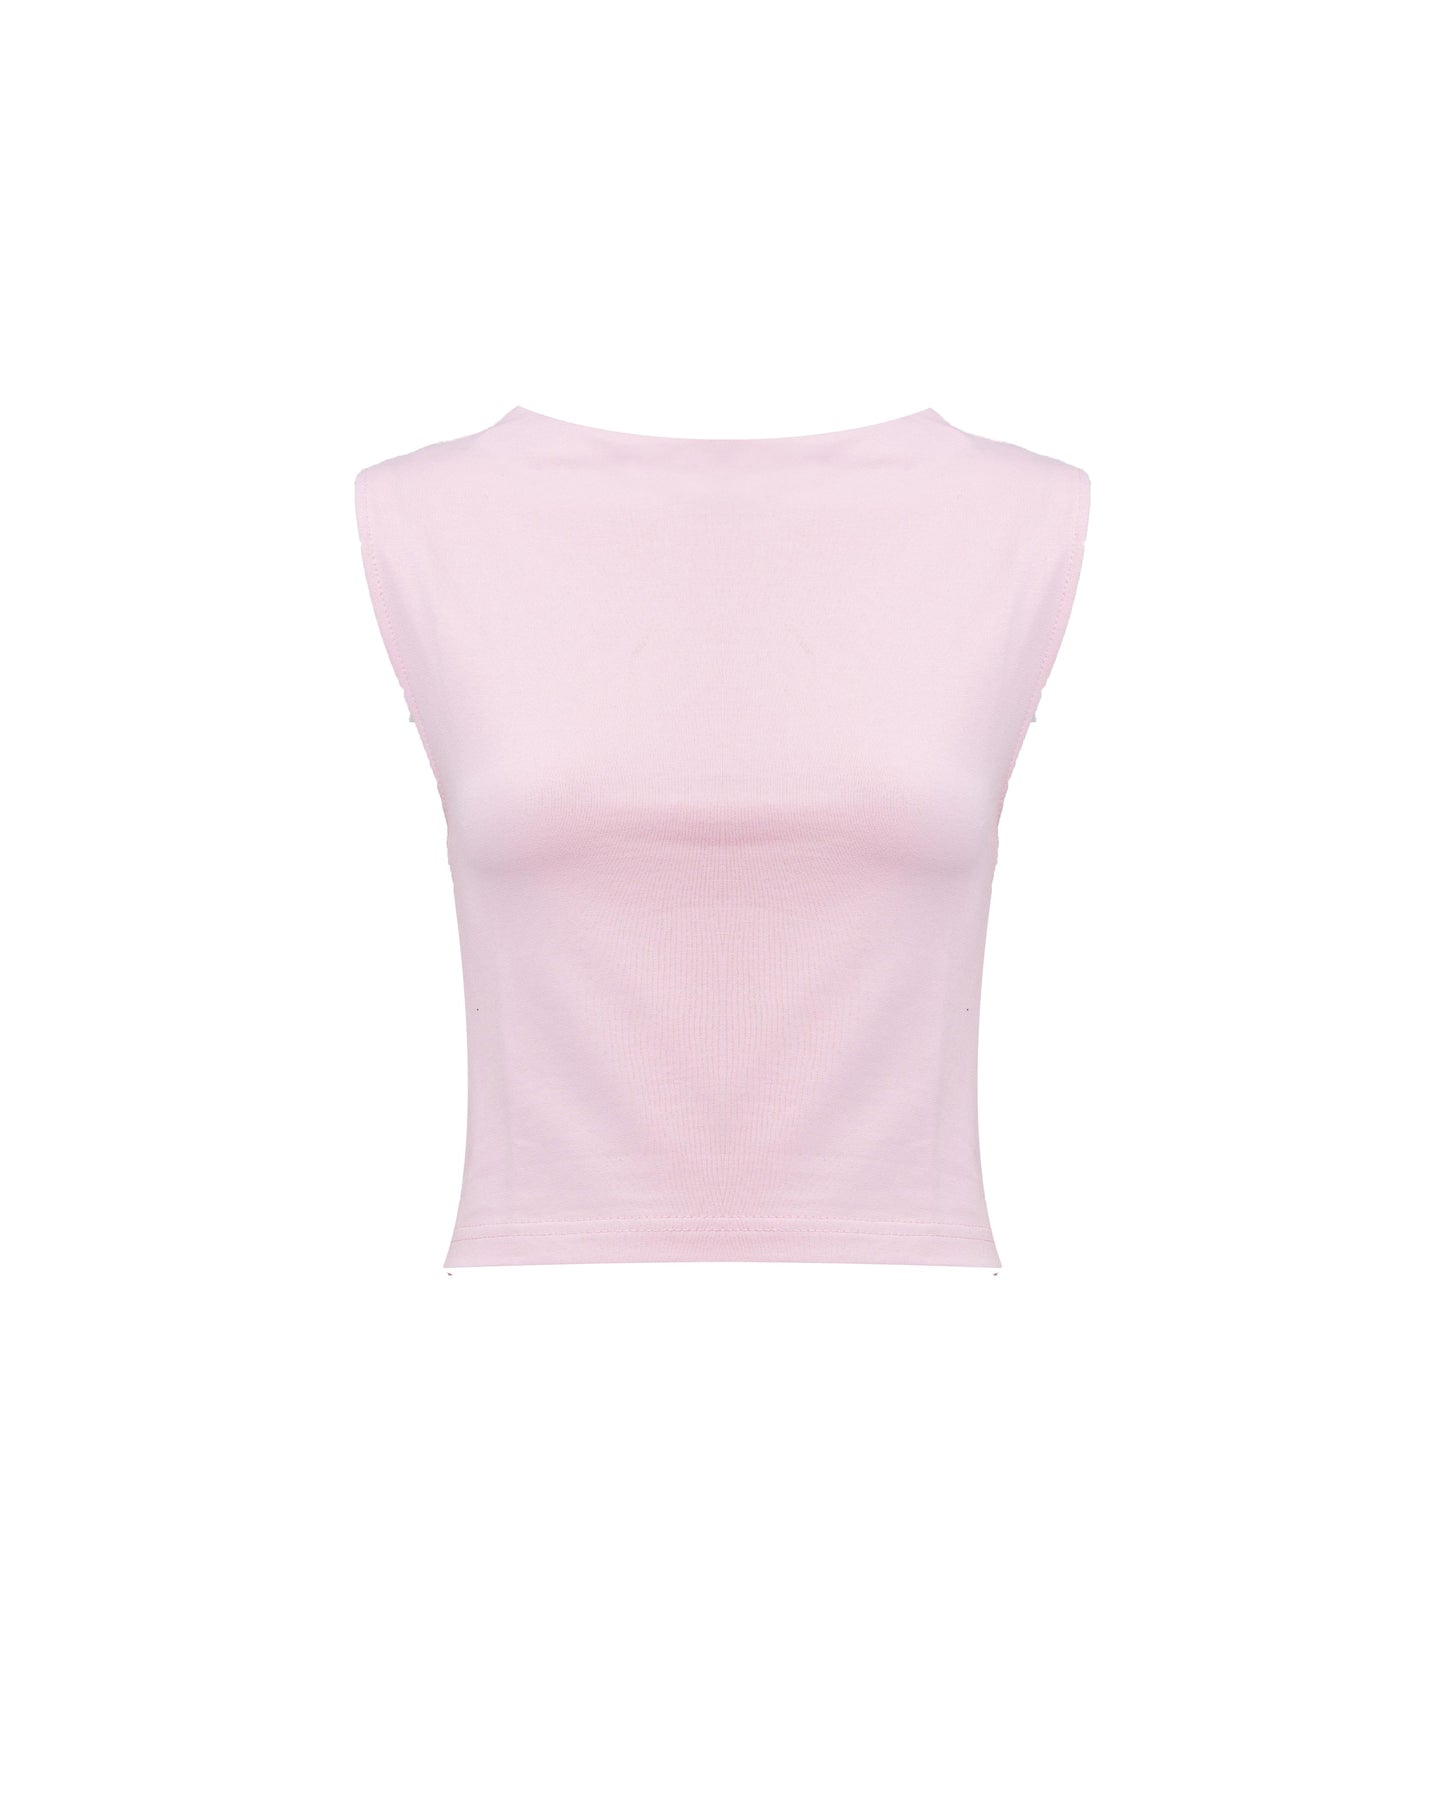 BABY PINK COTTON - SLEEVELESS TOP